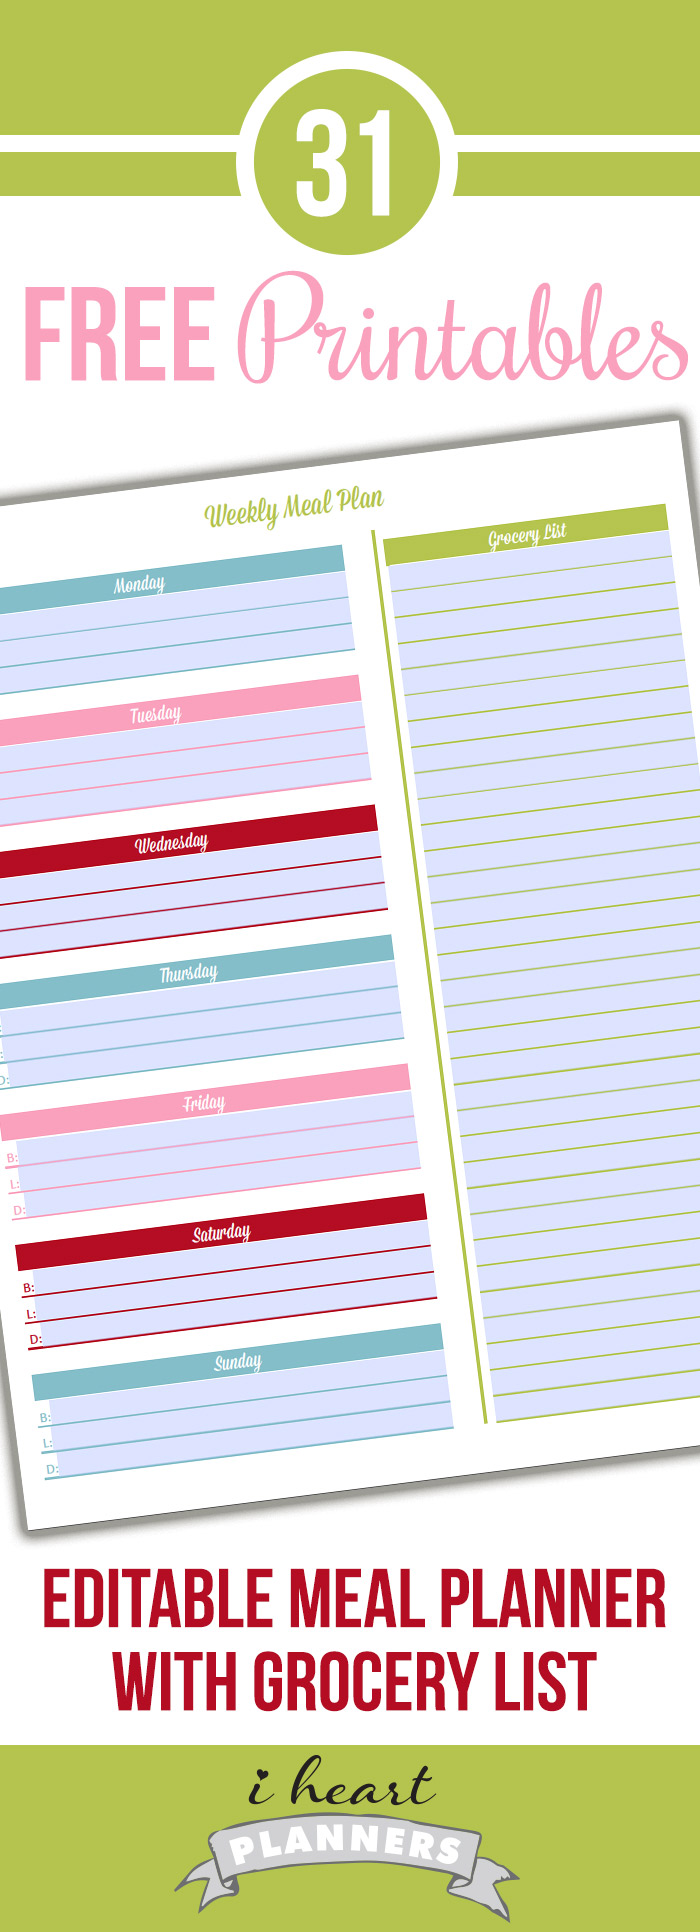 Free editable meal planner with grocery list